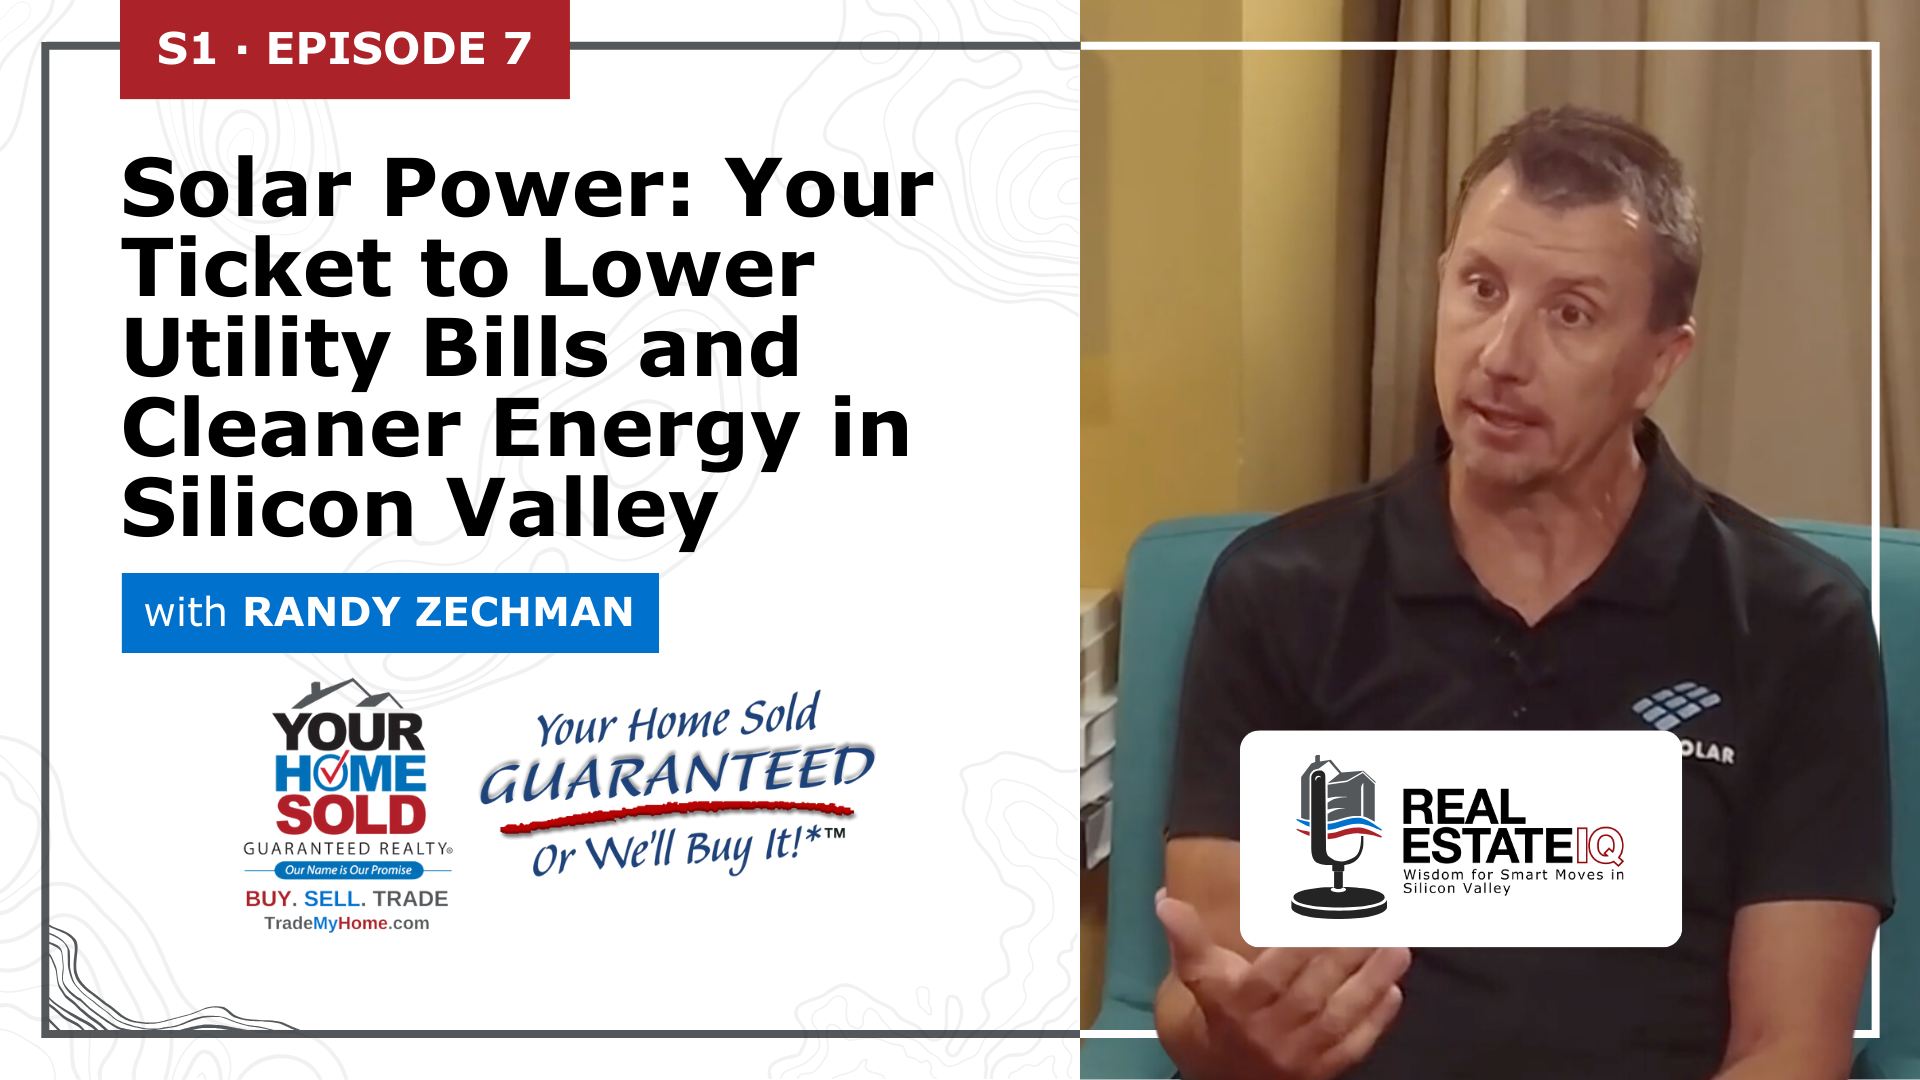 Solar Power: Your Ticket to Lower Utility Bills in Silicon Valley Video